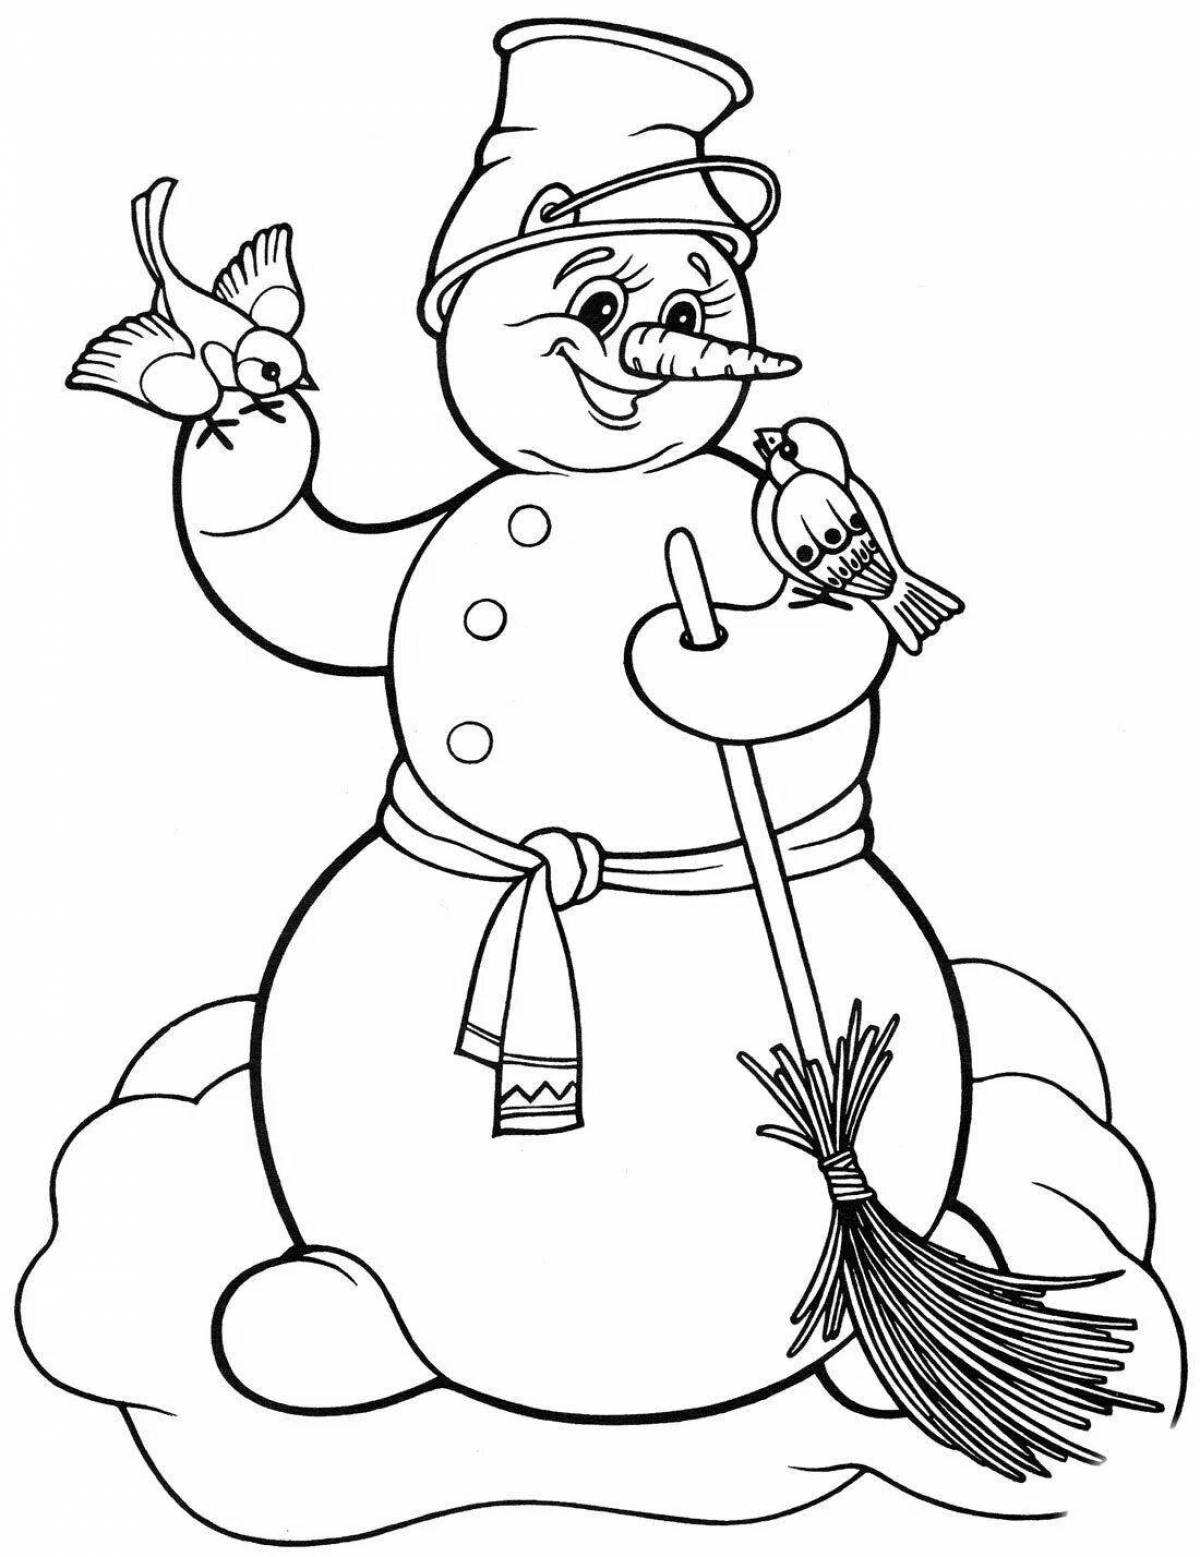 Colorful snowman coloring book for children 6-7 years old